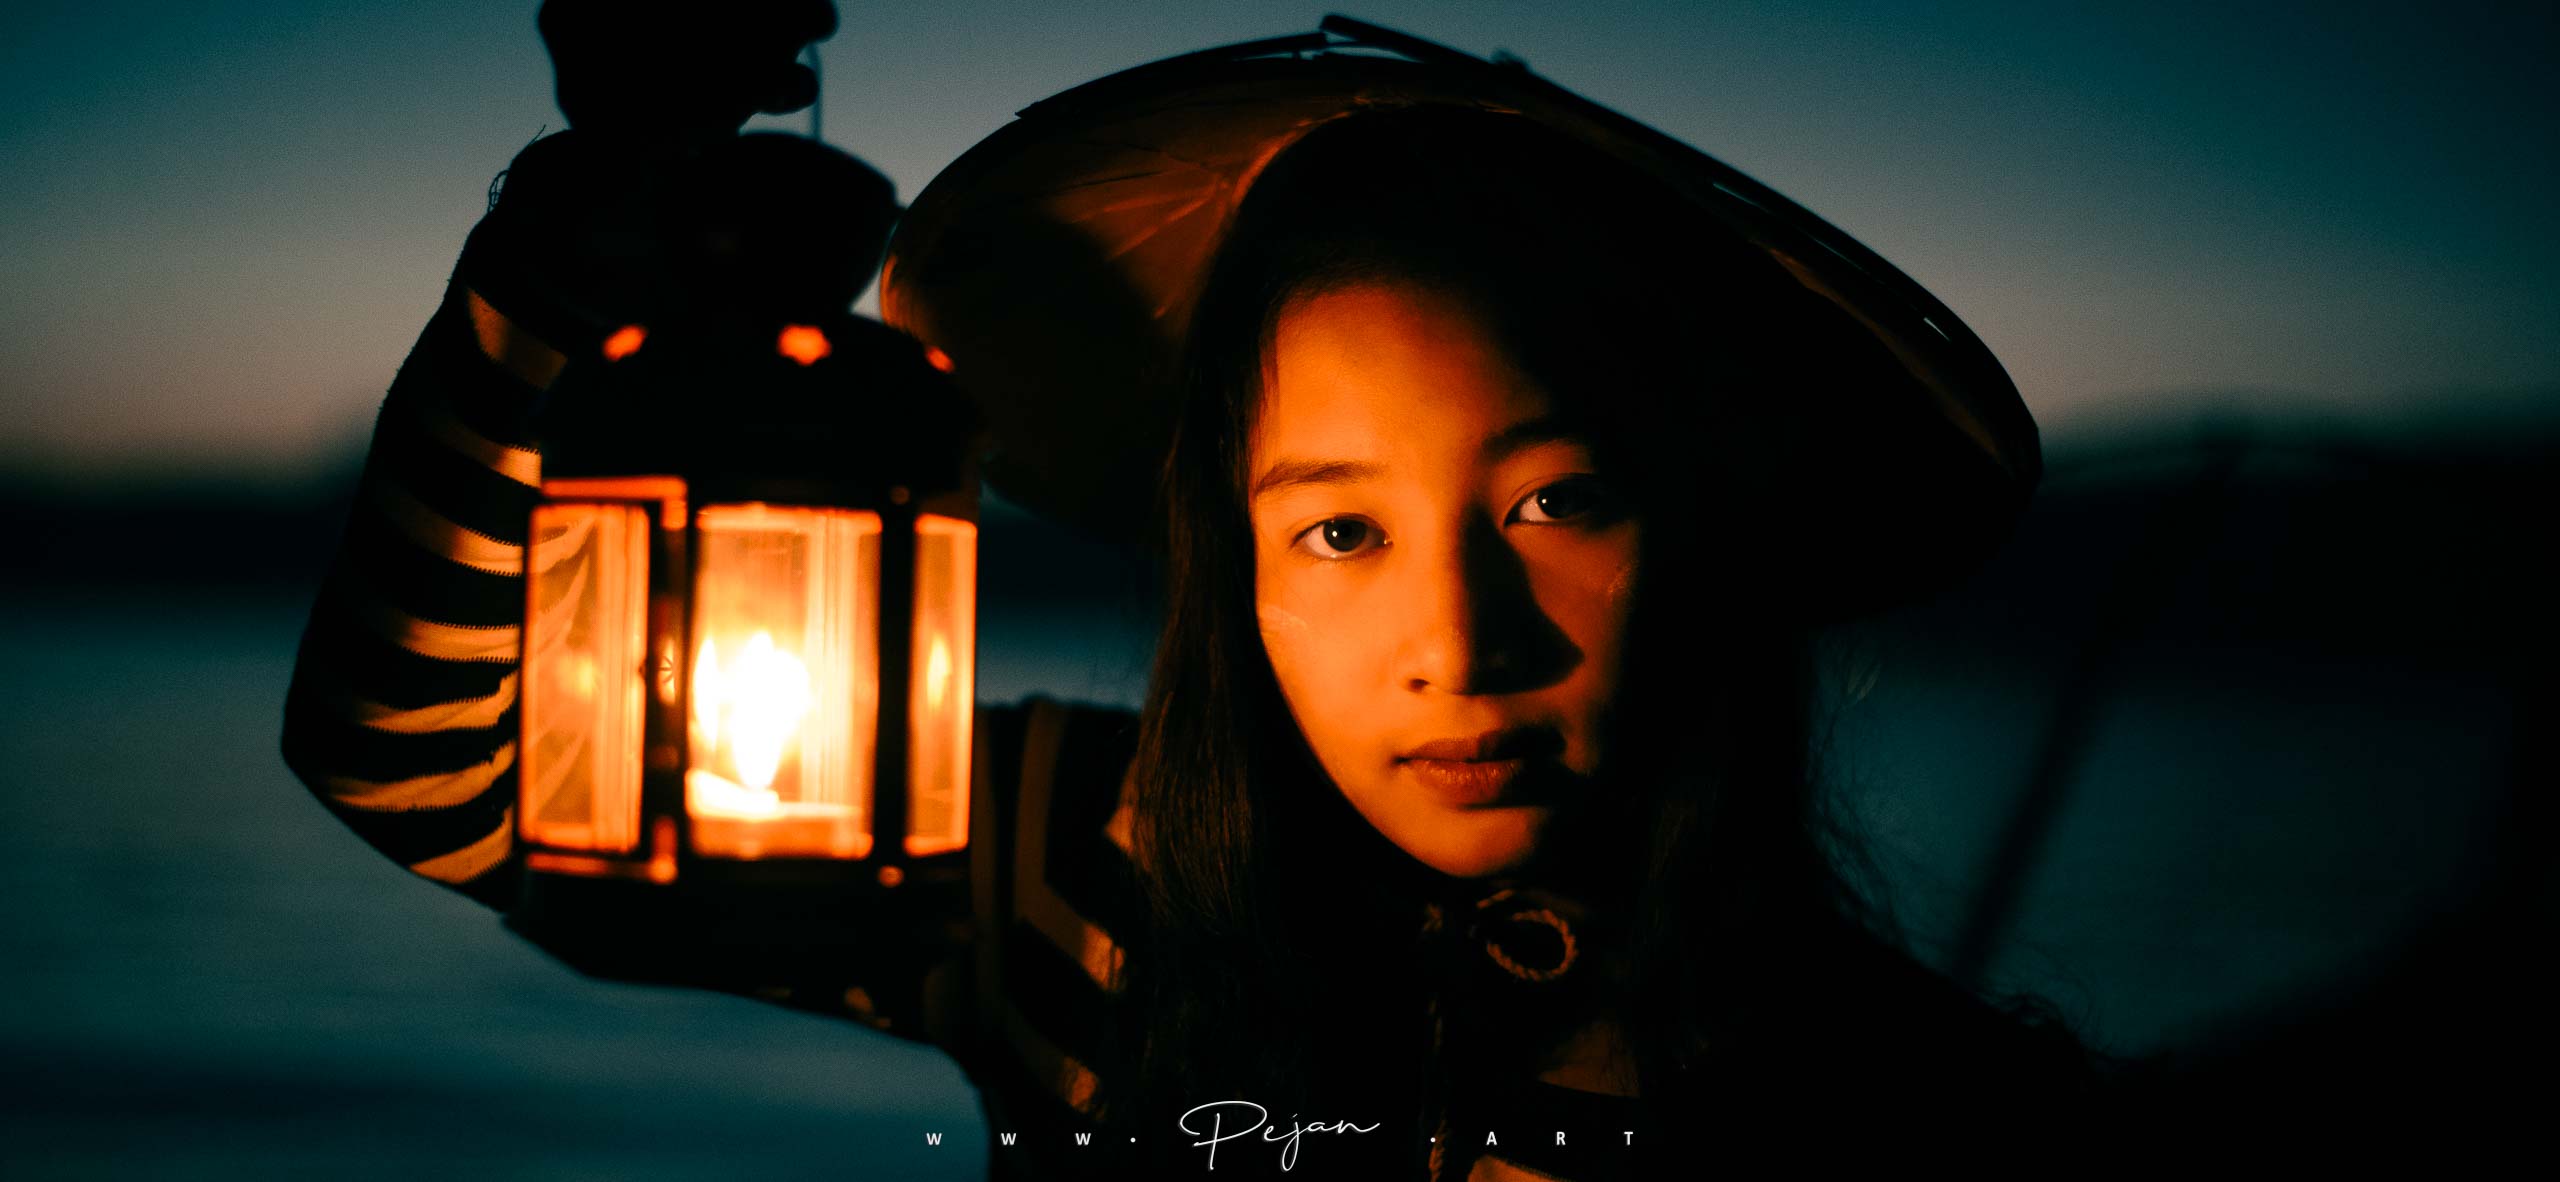 Portrait of a young girl from the Intha ethnic group who is holding a lamp. The photo is taken at night and the light reflects on his face. Inle Lake, Myanmar